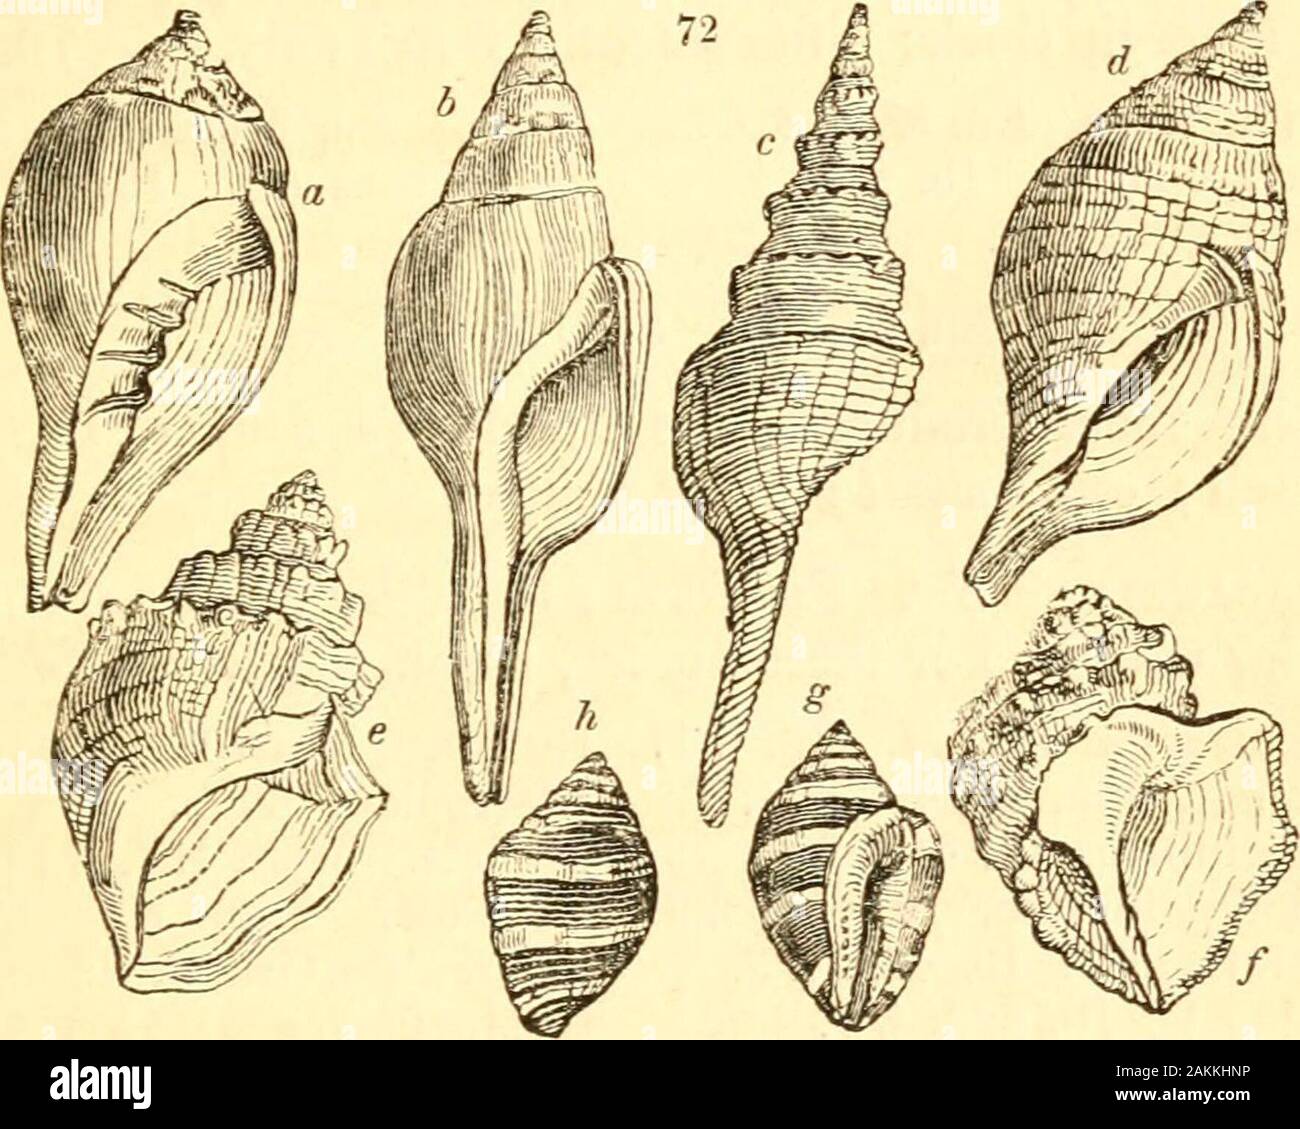 A treatise on malacology; or, Shells and shell fish . ns of the Ccriiliince. t Probably an aberrant species of Leiodomus. % Mr. Gray has the merit of first publishing this intricate, but most natu-ral genus, which I had many years ago also determined. 1 should gladlyhave adopted his name, were it not that Pollia has been already given byHiihner and Trcitsch to a genus of lepidopterous insects. Mr. Gray has veryhappily determined what is certainly its true station in the natural system,— that is, intermediate between Triton and Biiccinmn. It is connected torritun by T. clandcsfinum. Ency. Meth. Stock Photo